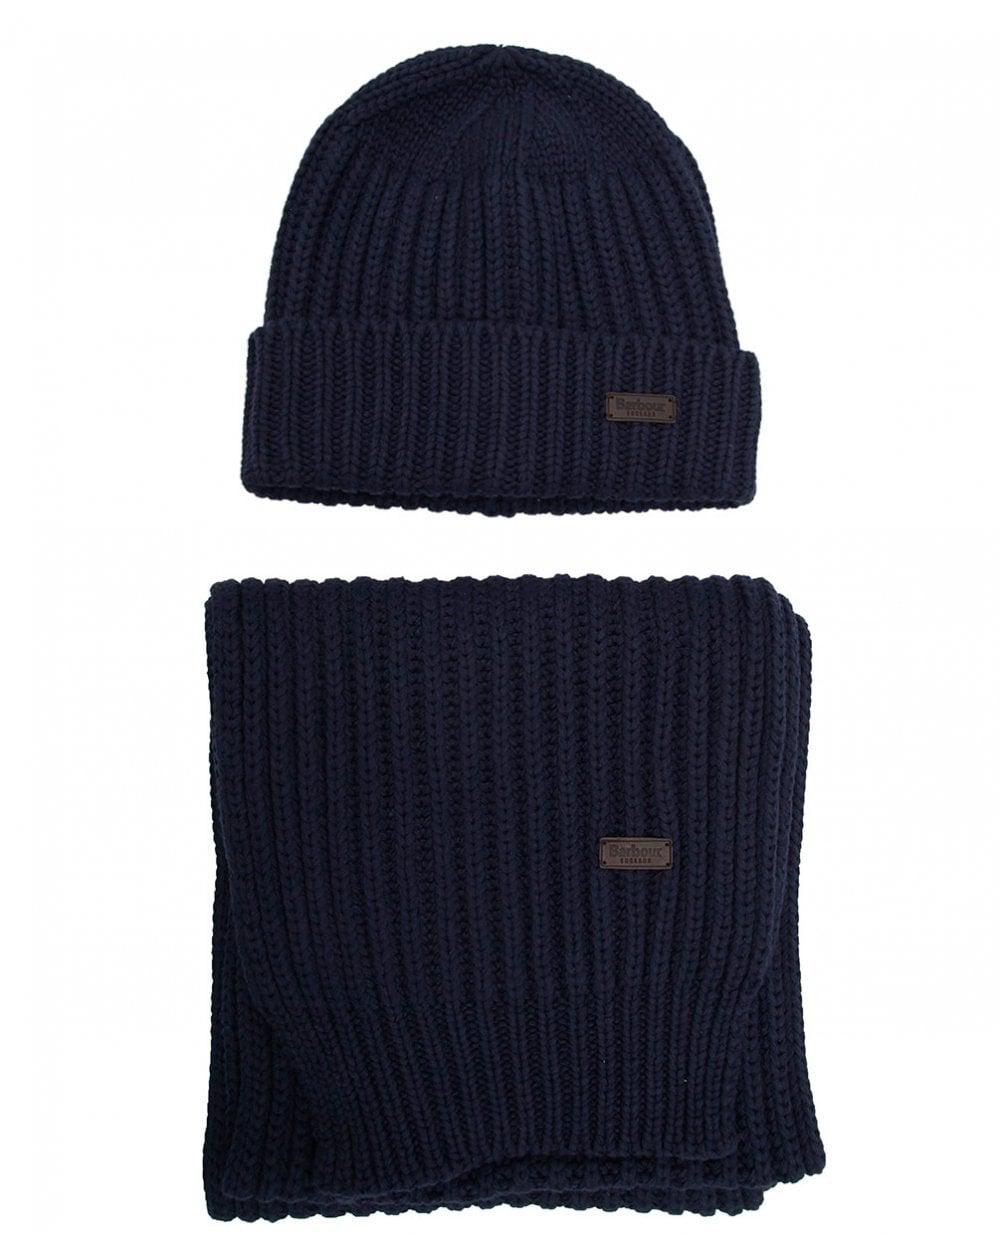 mens barbour hat and scarf set online -